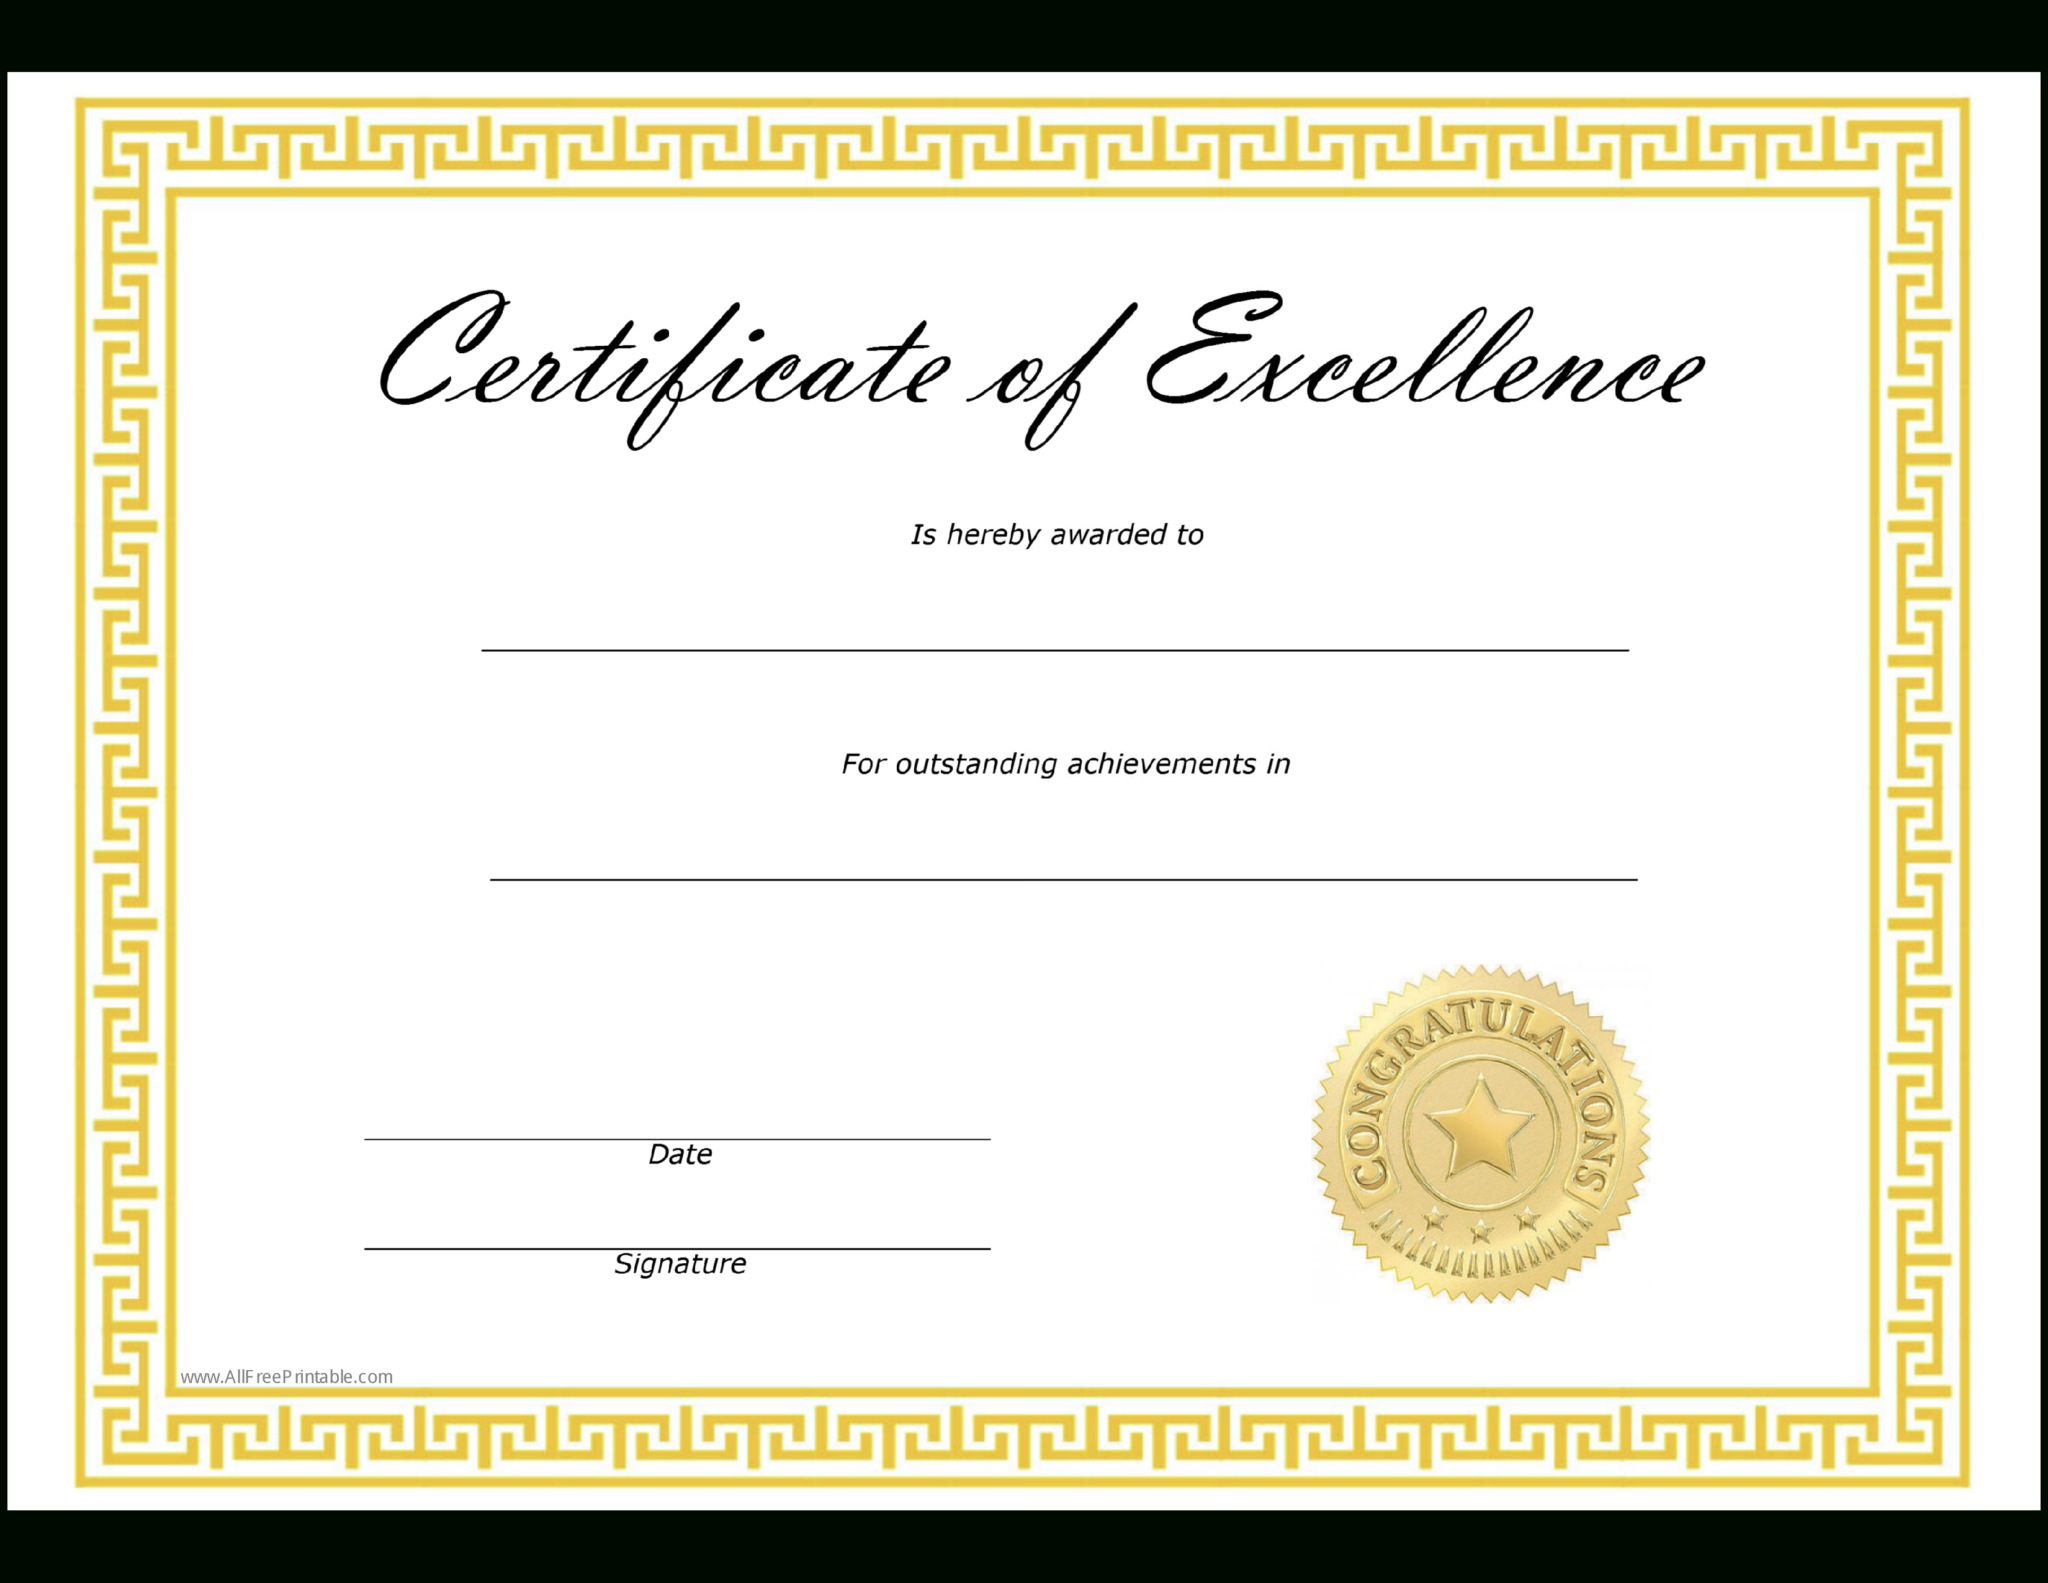 Certificates Of Excellence Templates Calep midnightpig co For Blank